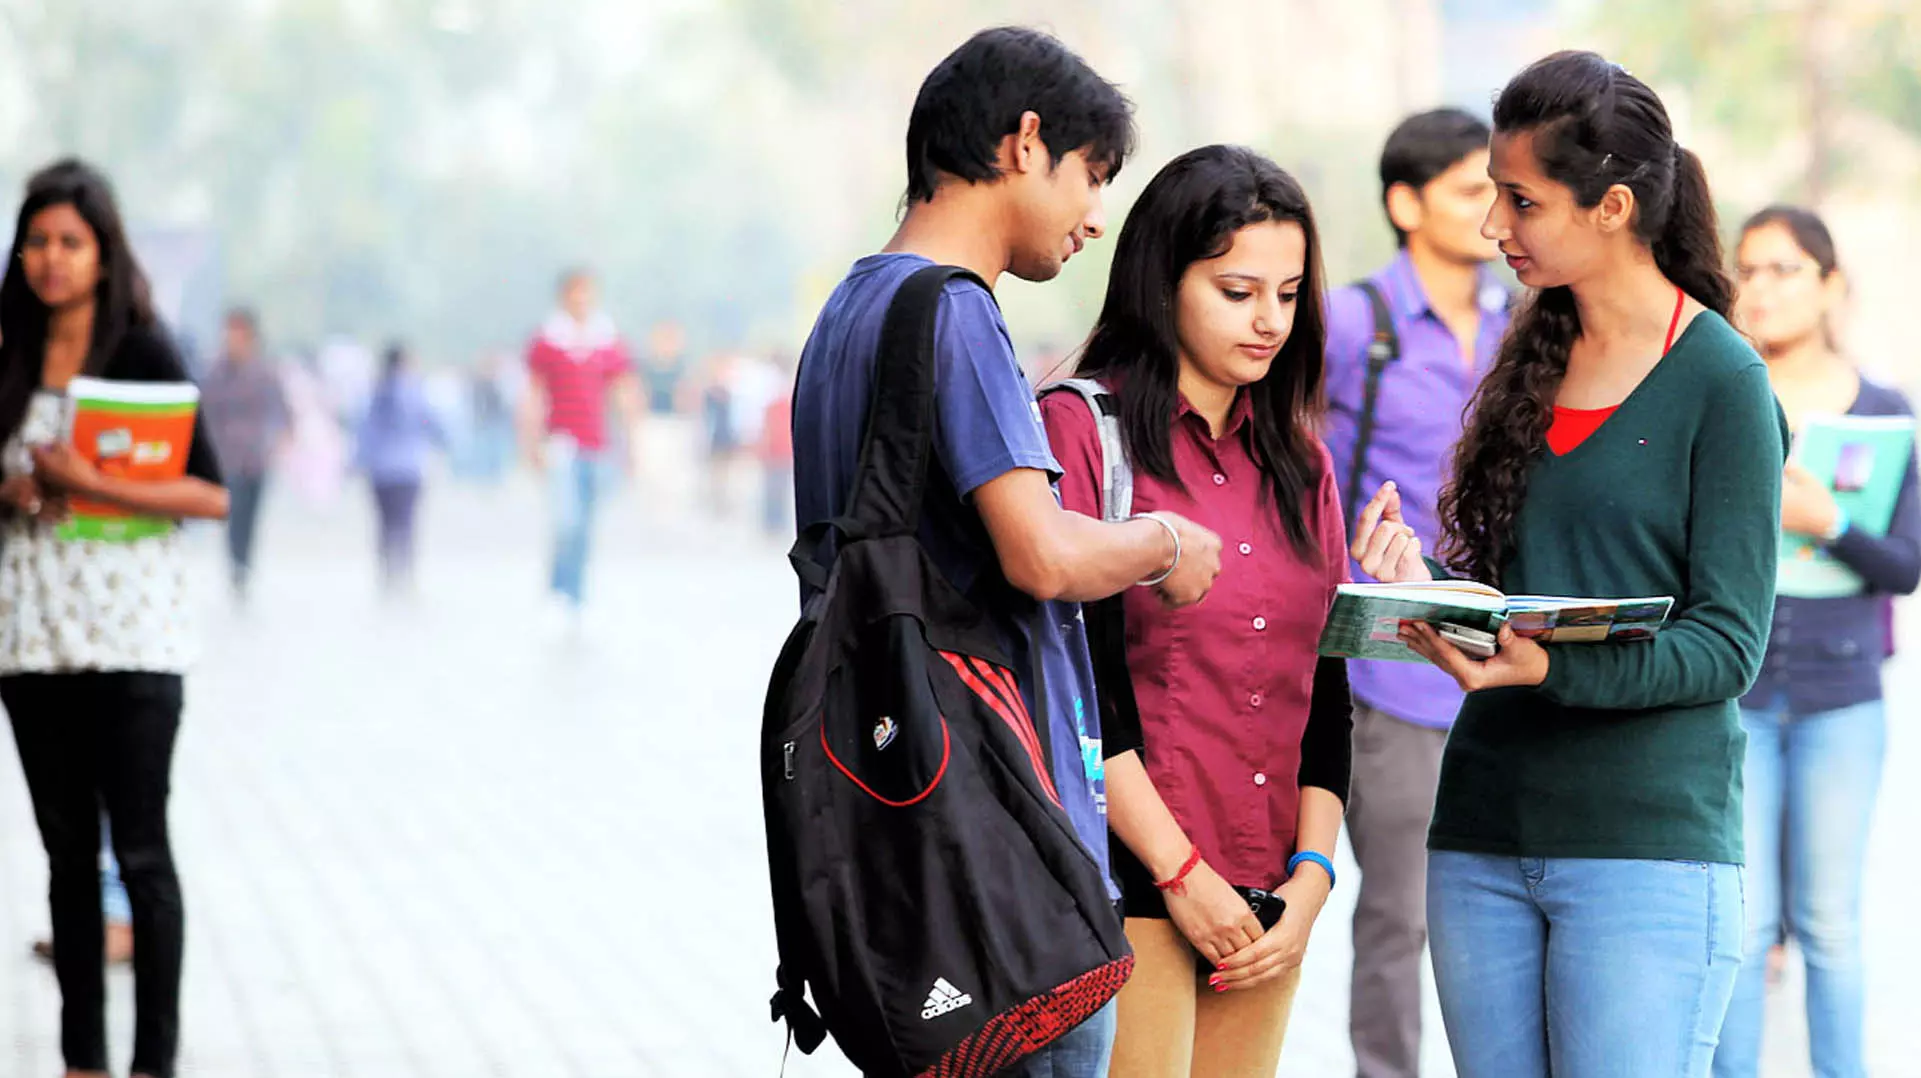 ASER Report 42.7 of Teens in India Struggle to Read English Sentences